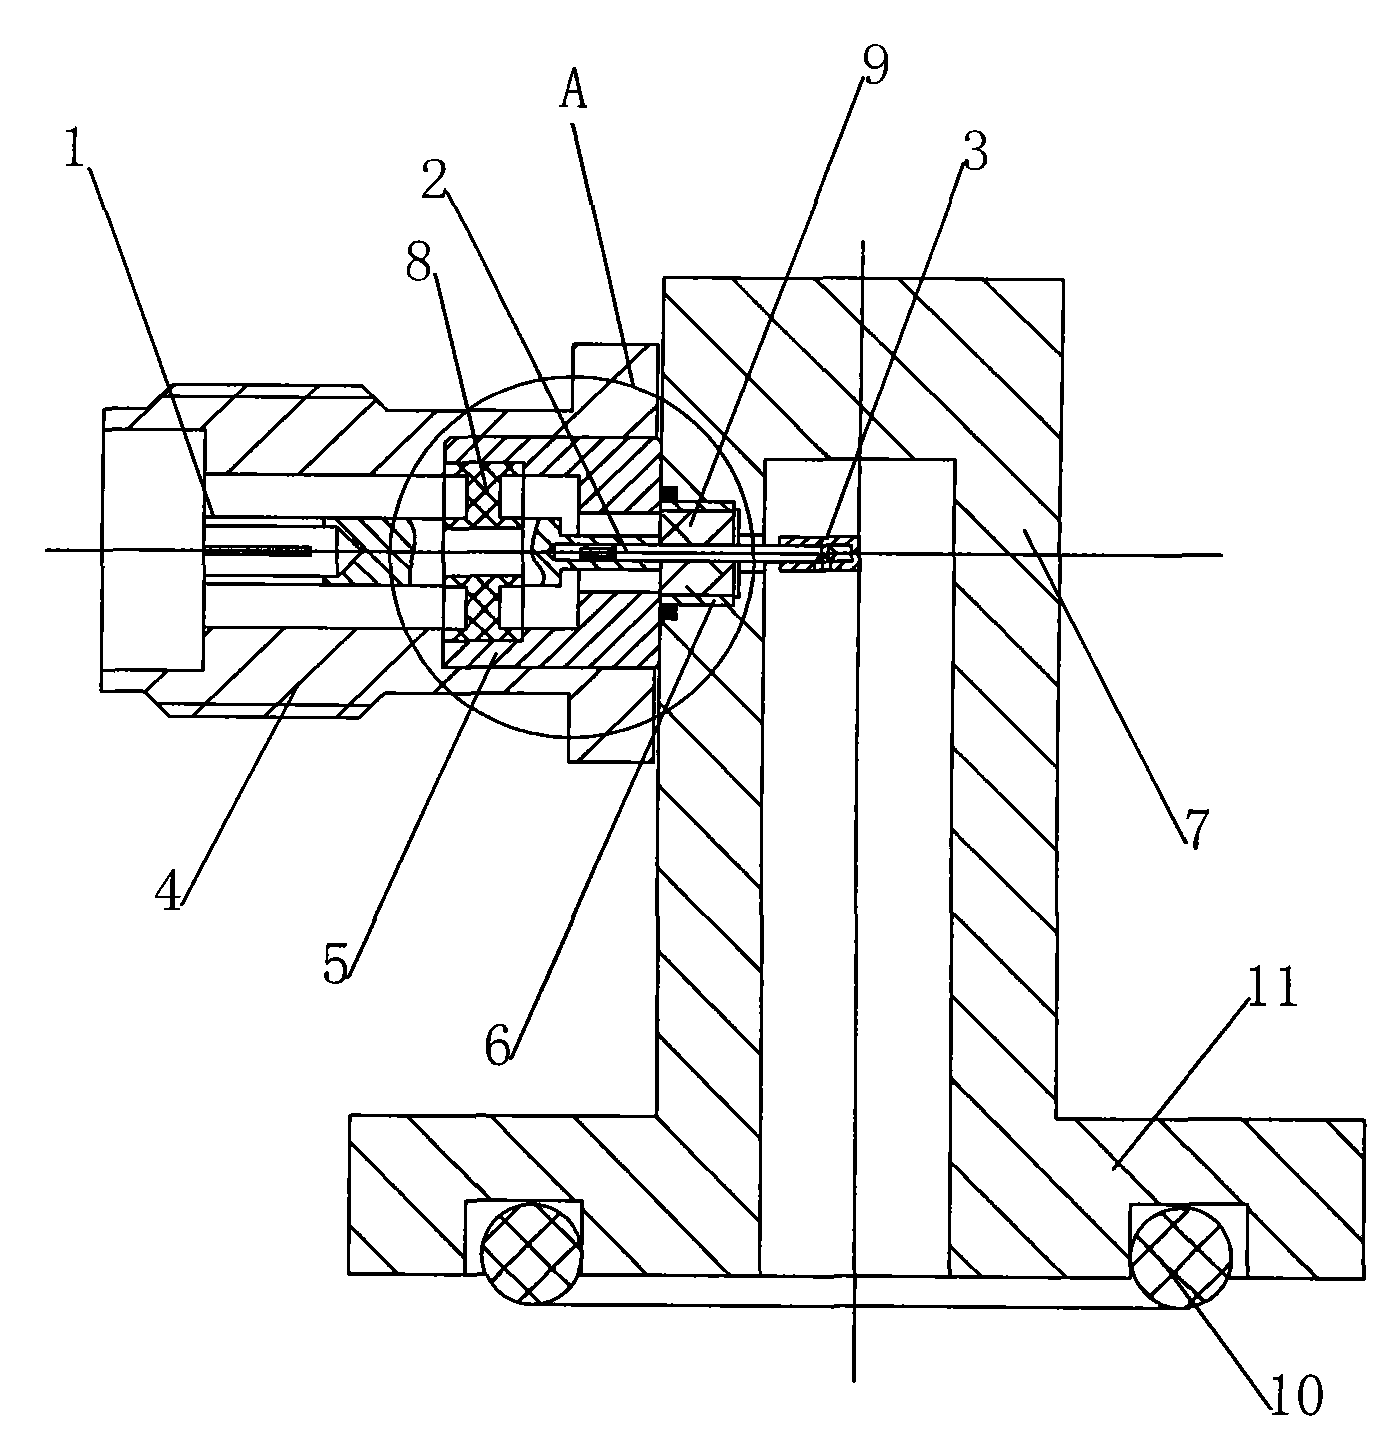 Coaxial millimeter wave adaptor with air-tight waveguide